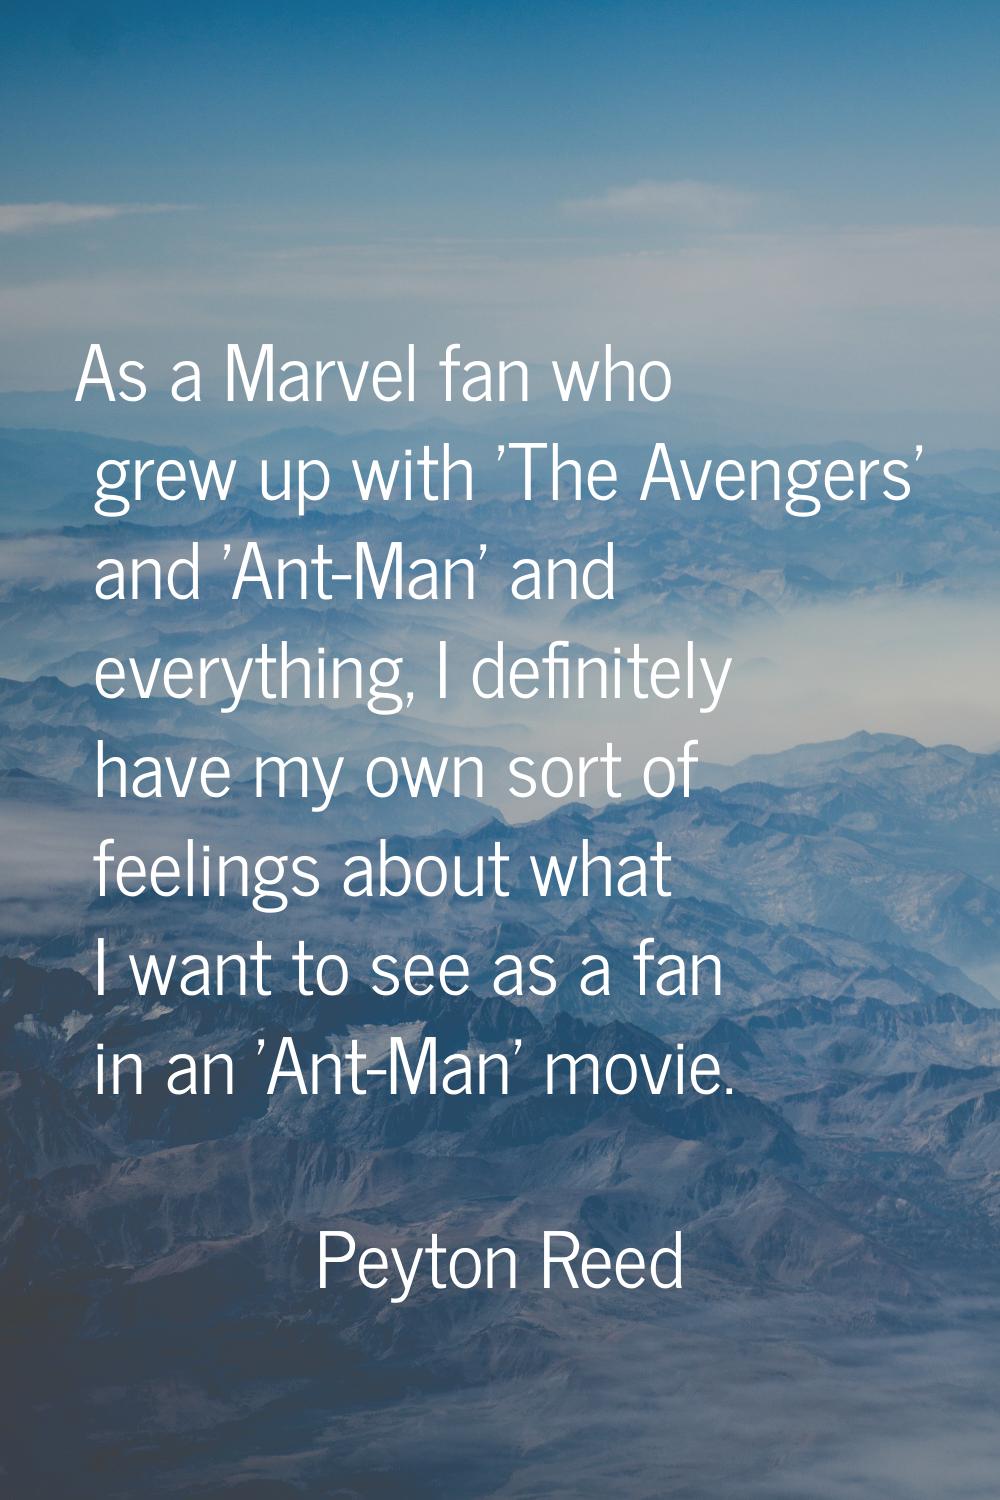 As a Marvel fan who grew up with 'The Avengers' and 'Ant-Man' and everything, I definitely have my 